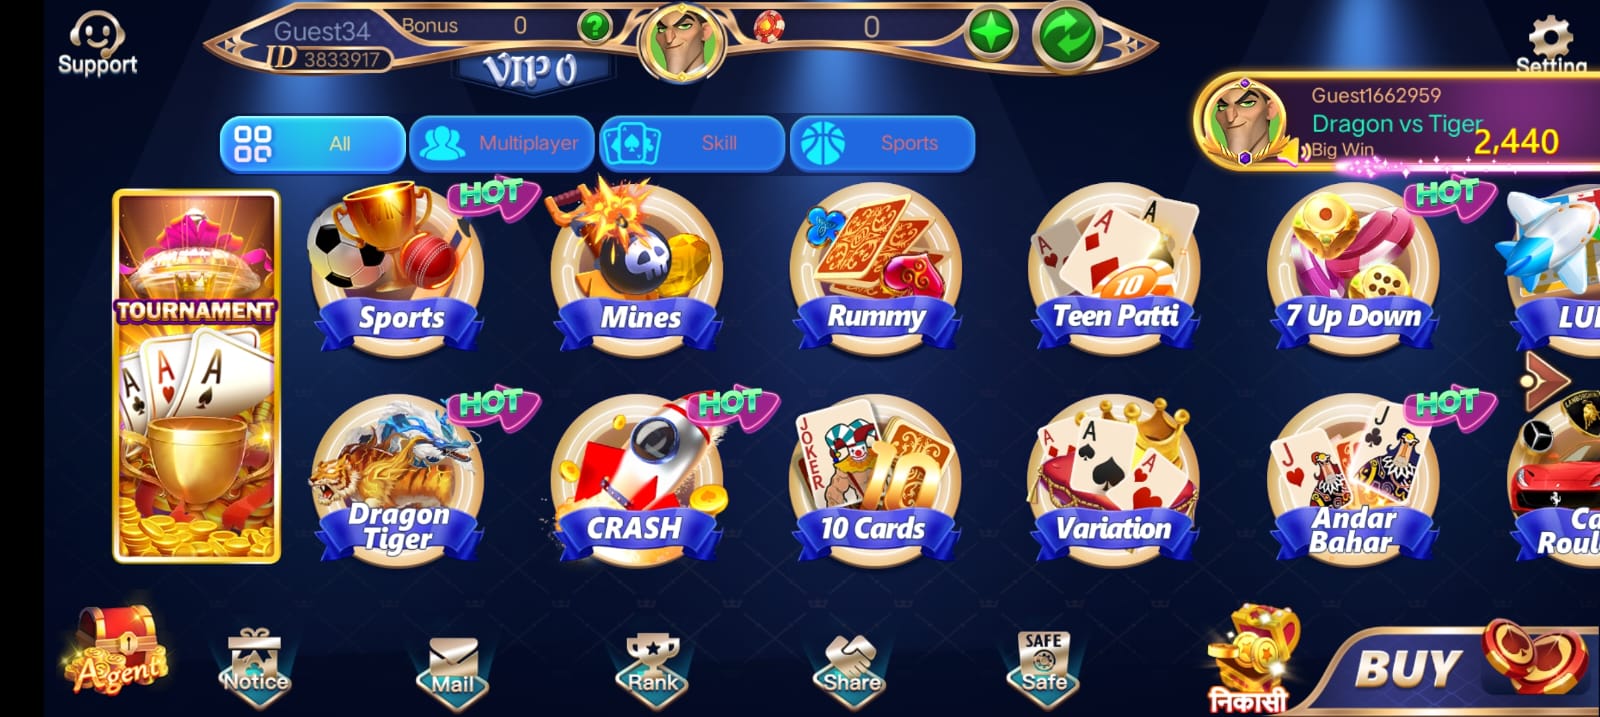 Available Game’s In Teen Patti Wind Apk